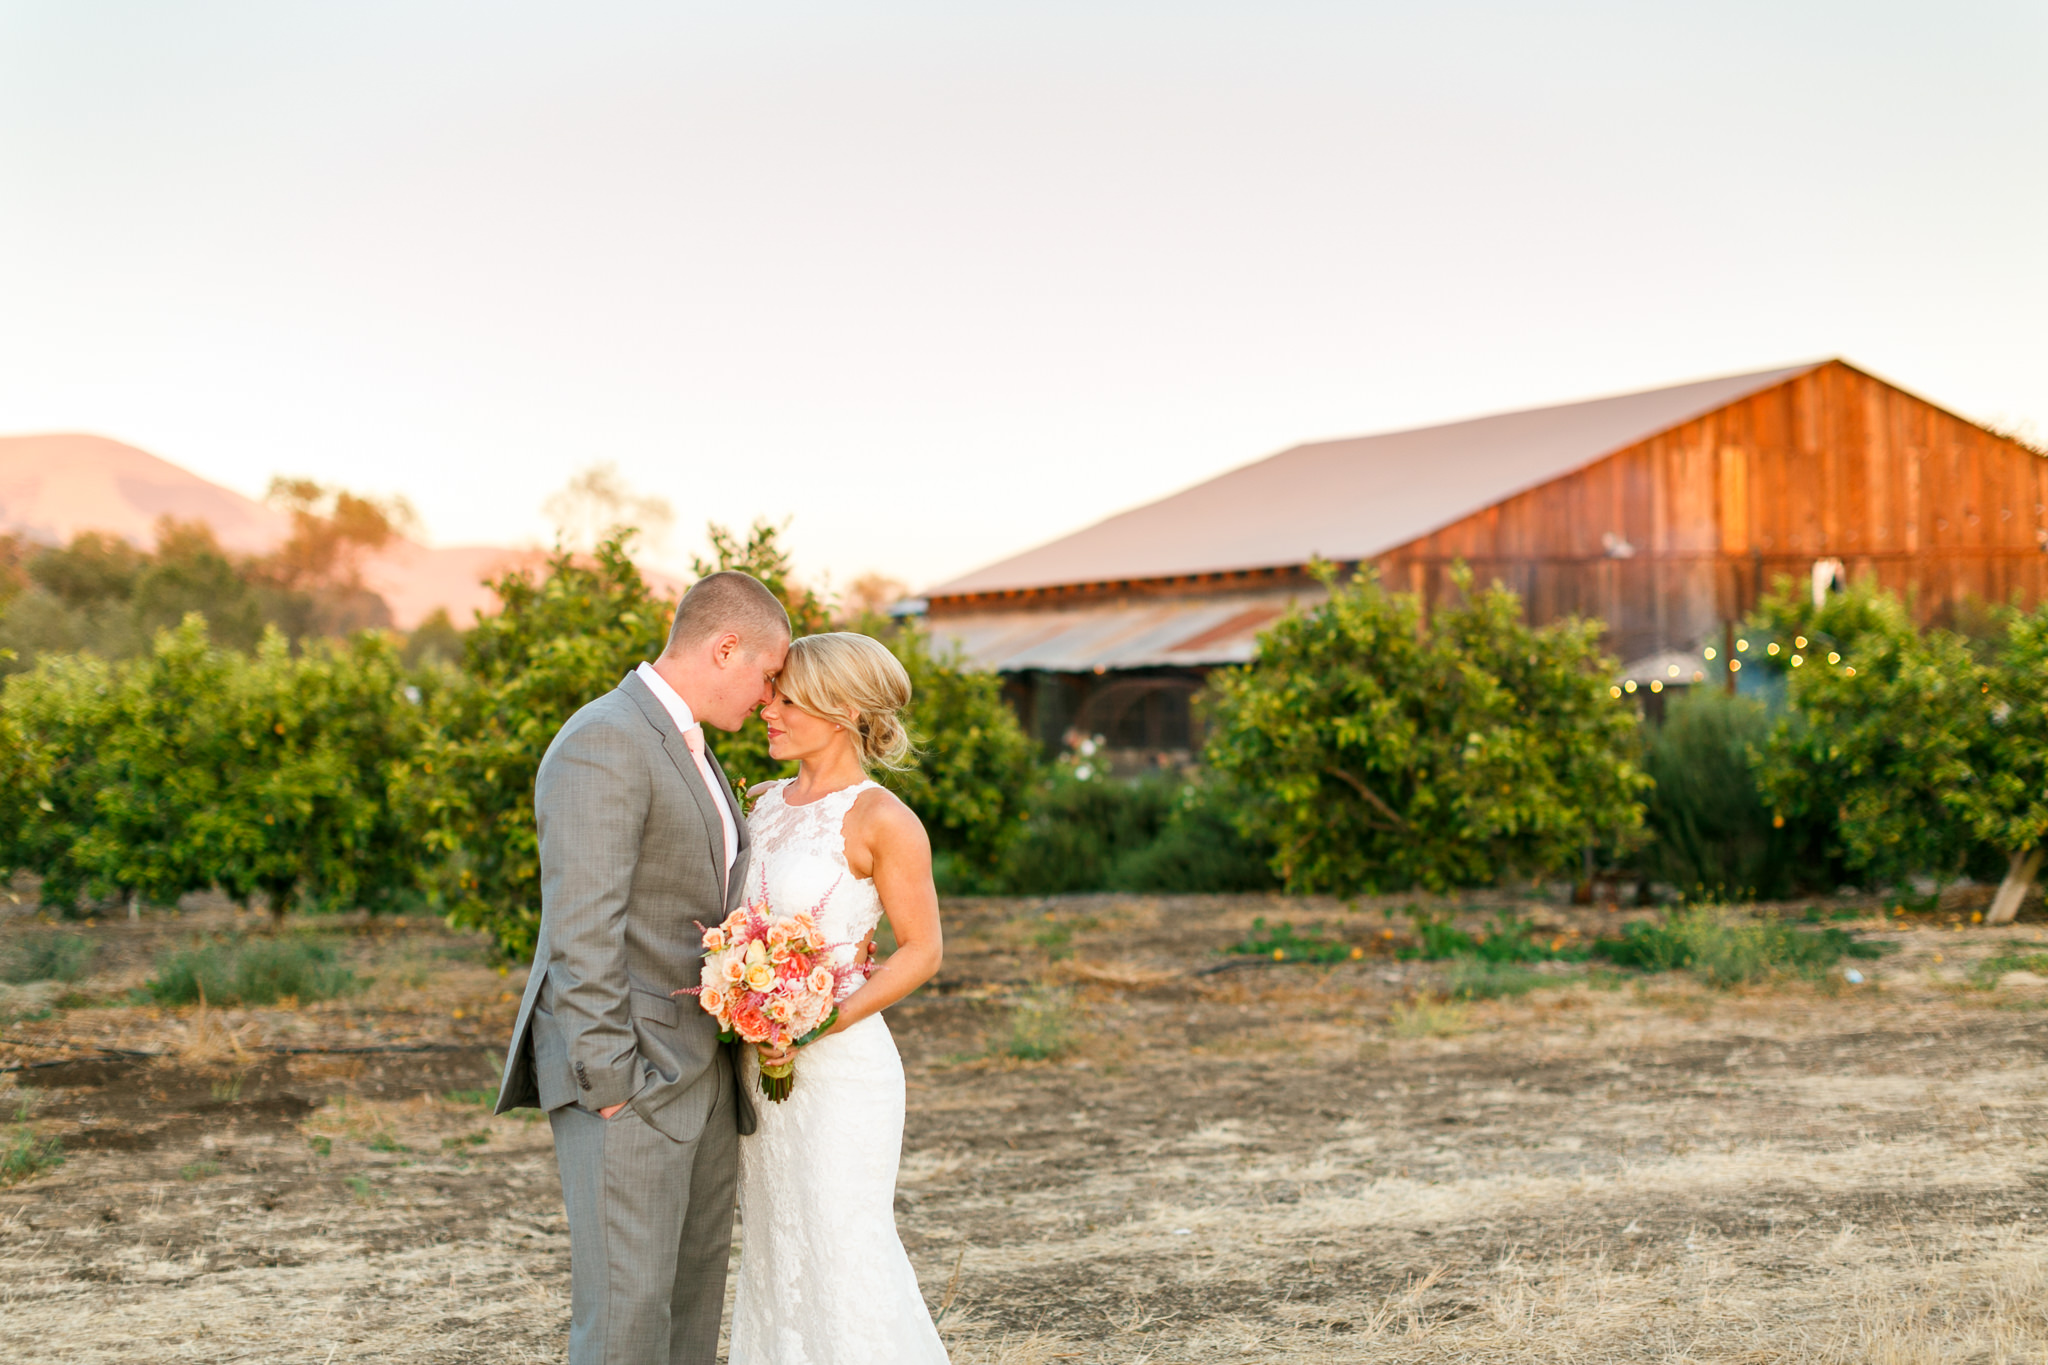 Bride and groom together at sunset after their wedding at Dana Powers Barn